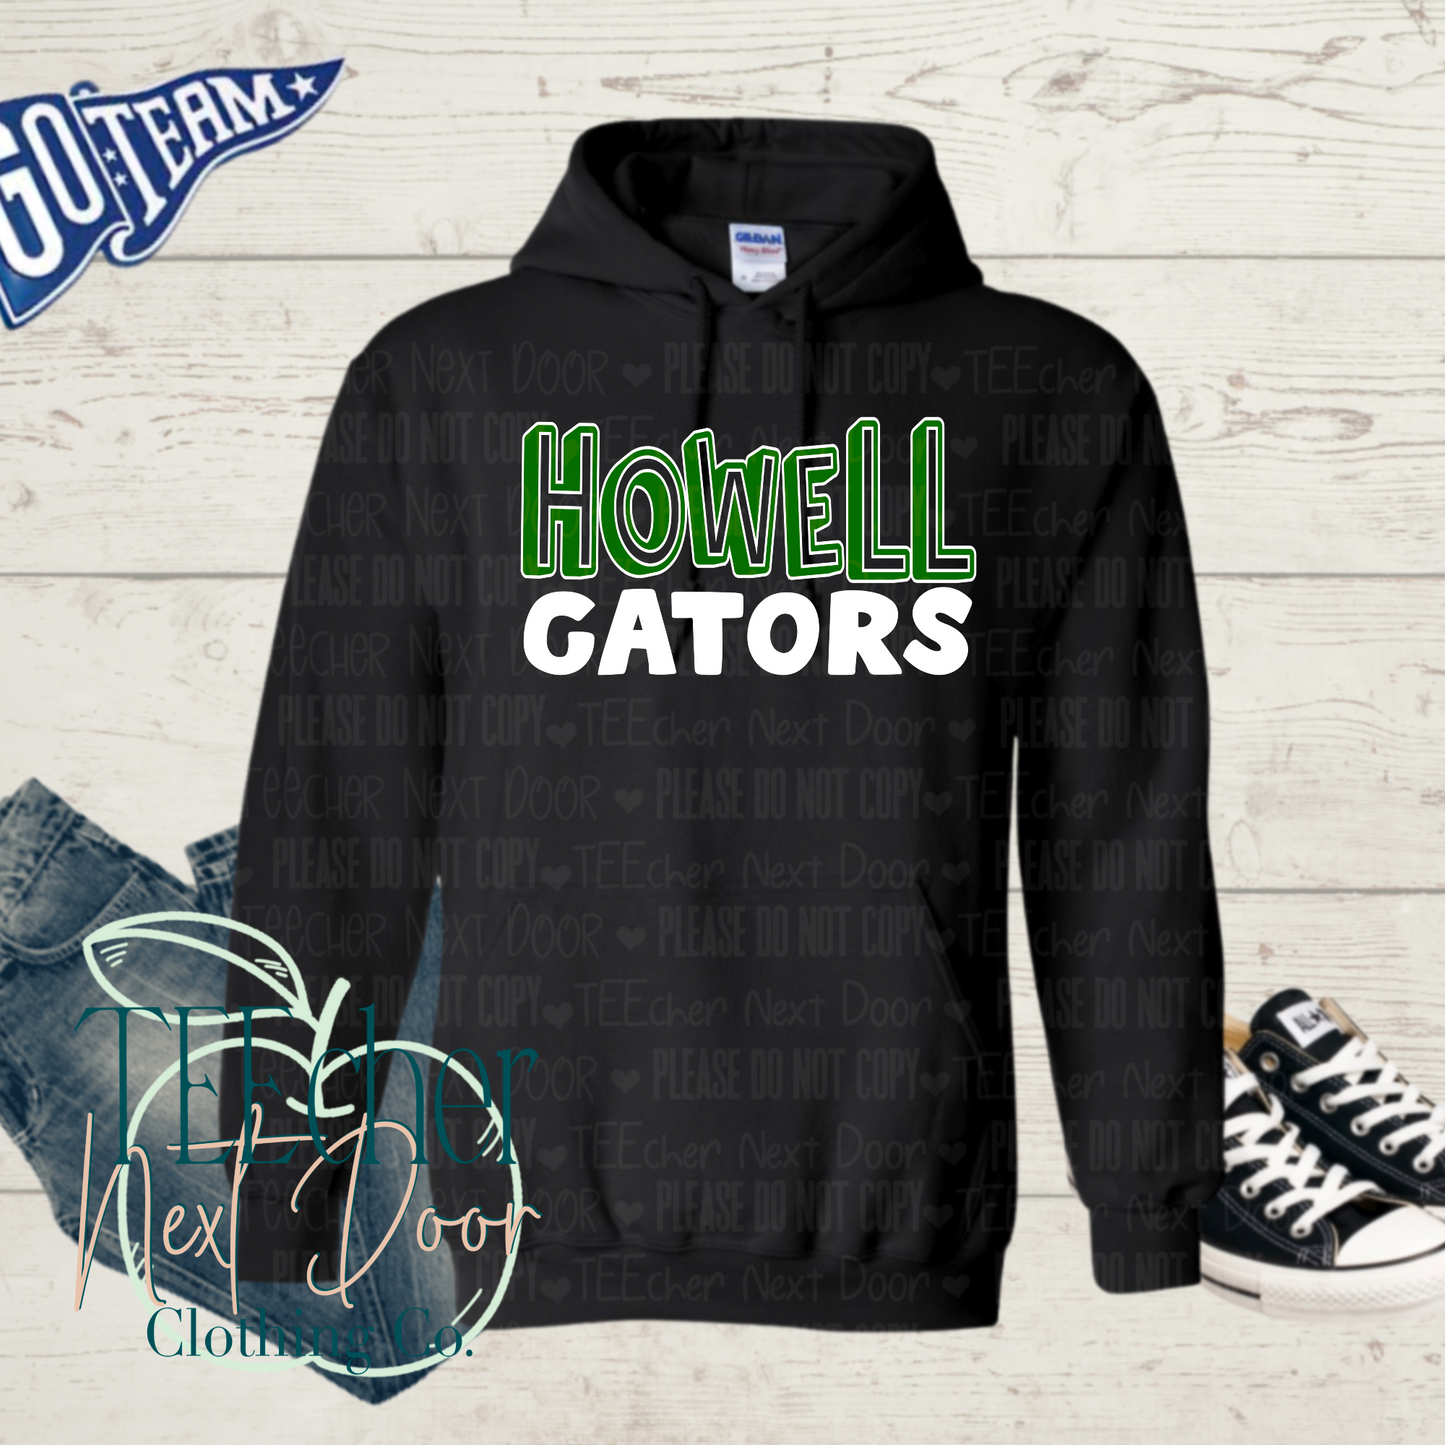 Howell Gators Fun and Simple